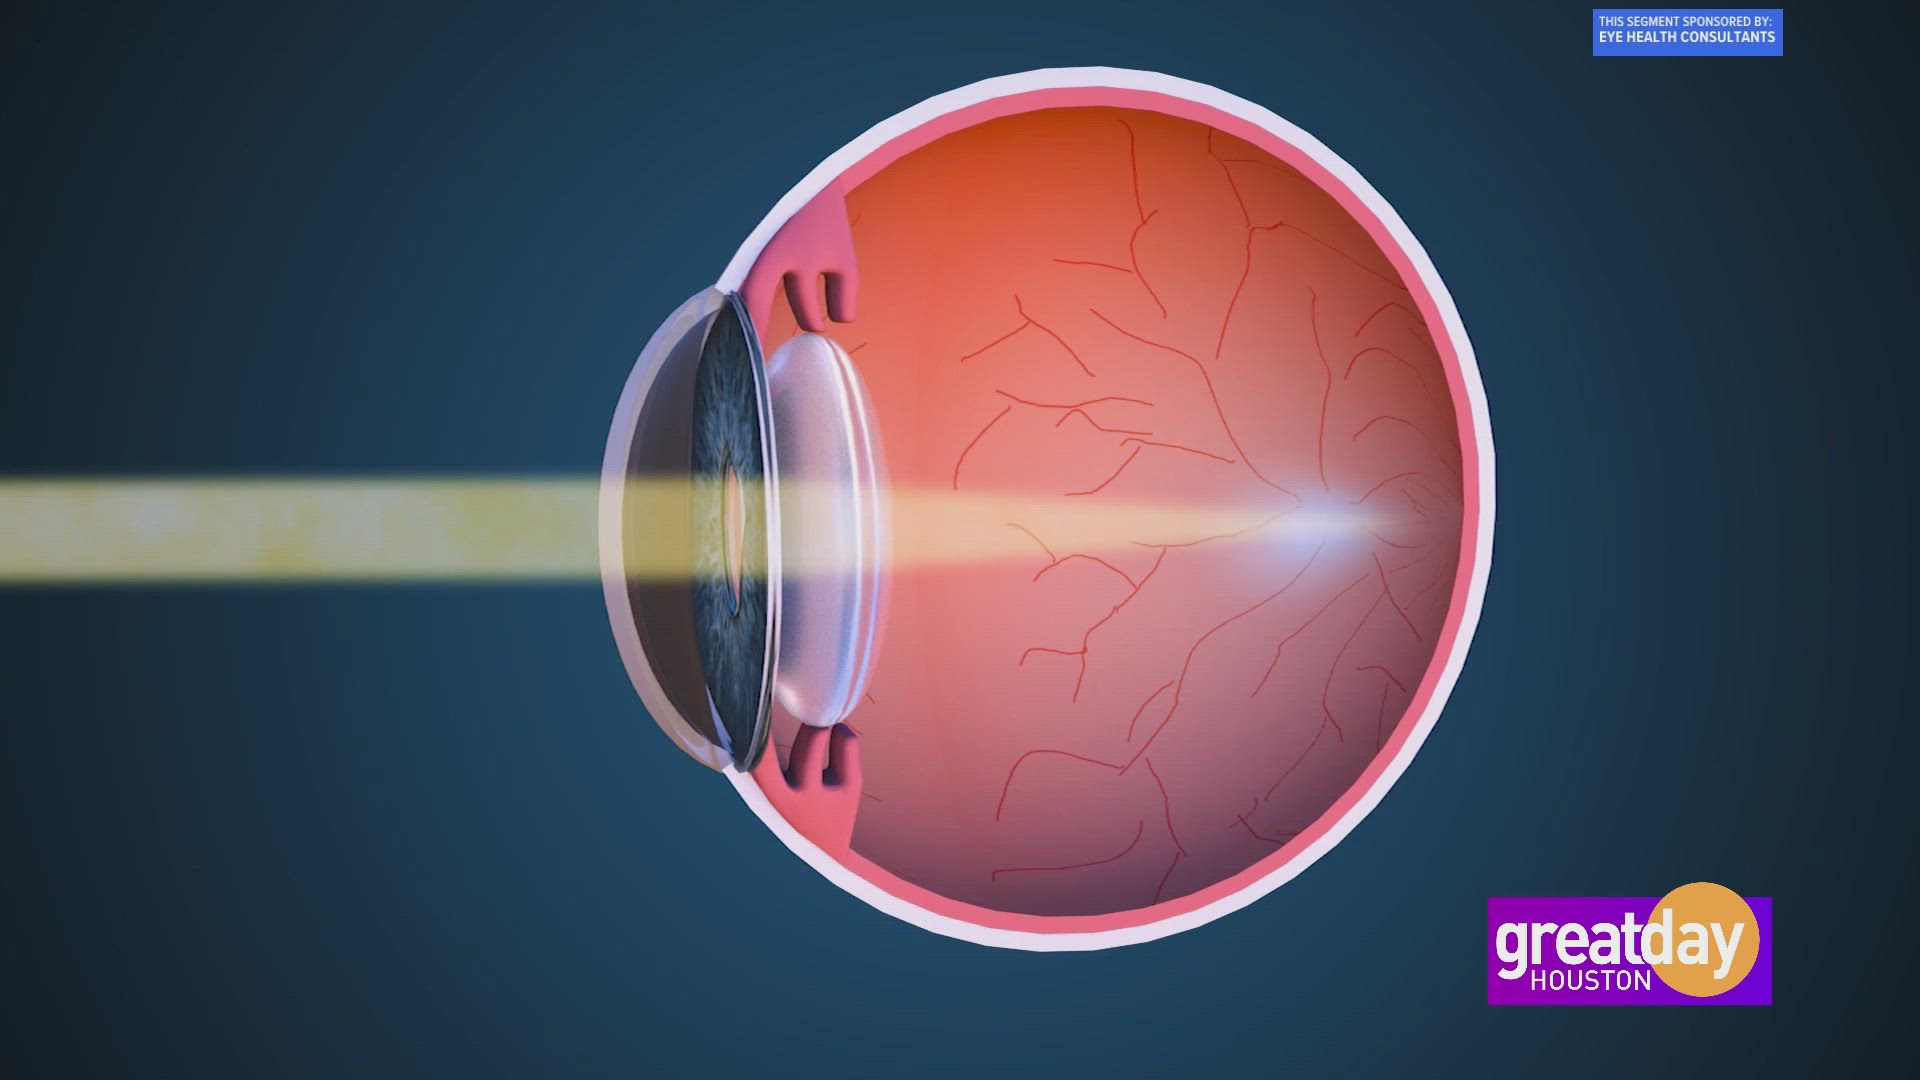 Dr. Julio Arroyo from Eye Health Consultants explains how corneal molding helps patients see clearly without glasses, daily contacts or surgery.